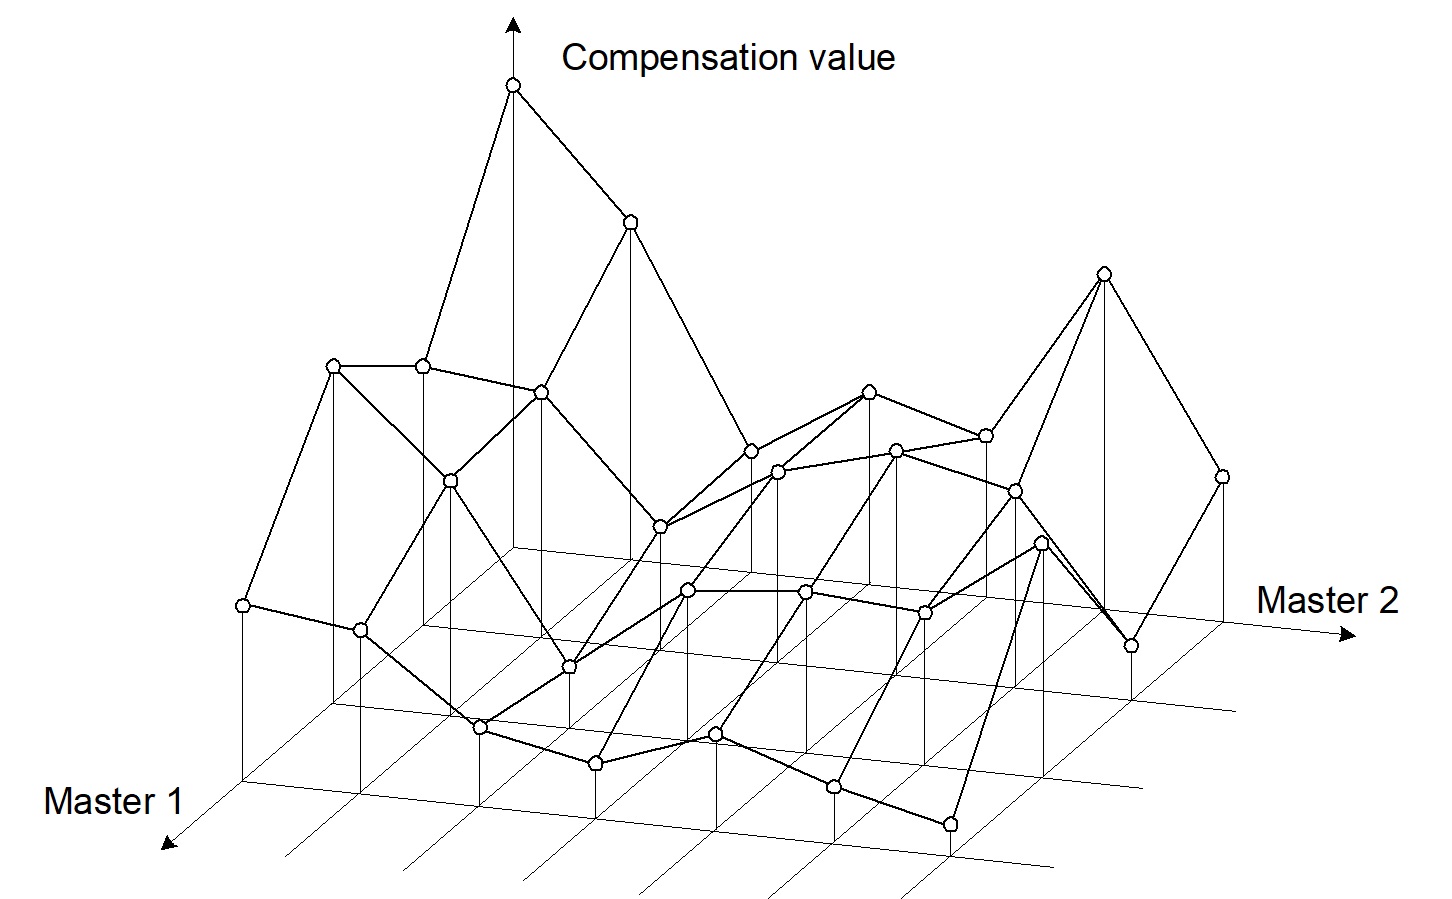 Specify compensation values at the interpolation points